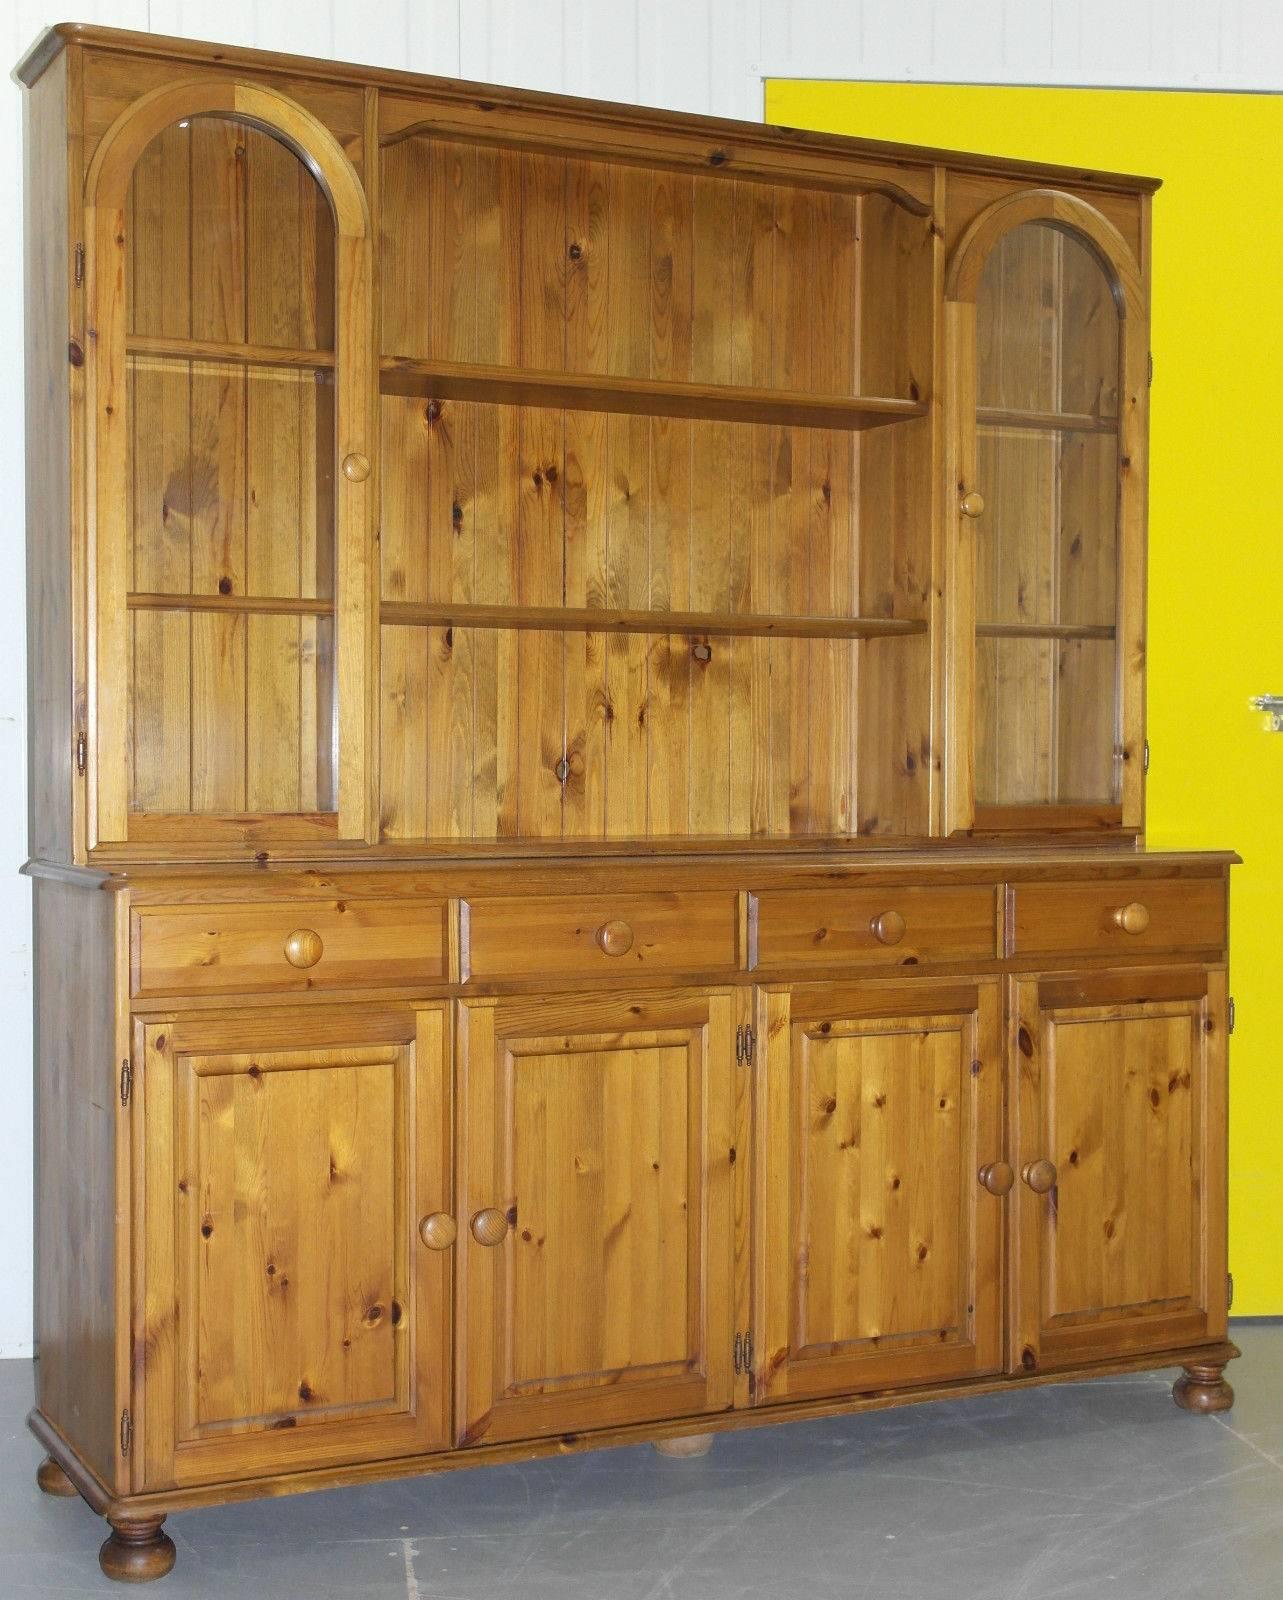 We are delighted to offer for sale this nice handmade in England Ducal Victoria solid pine welsh dresser

There are many models of these dressers this is one of the higher end pieces, the doors are very rare, they are half-moon finished at the top